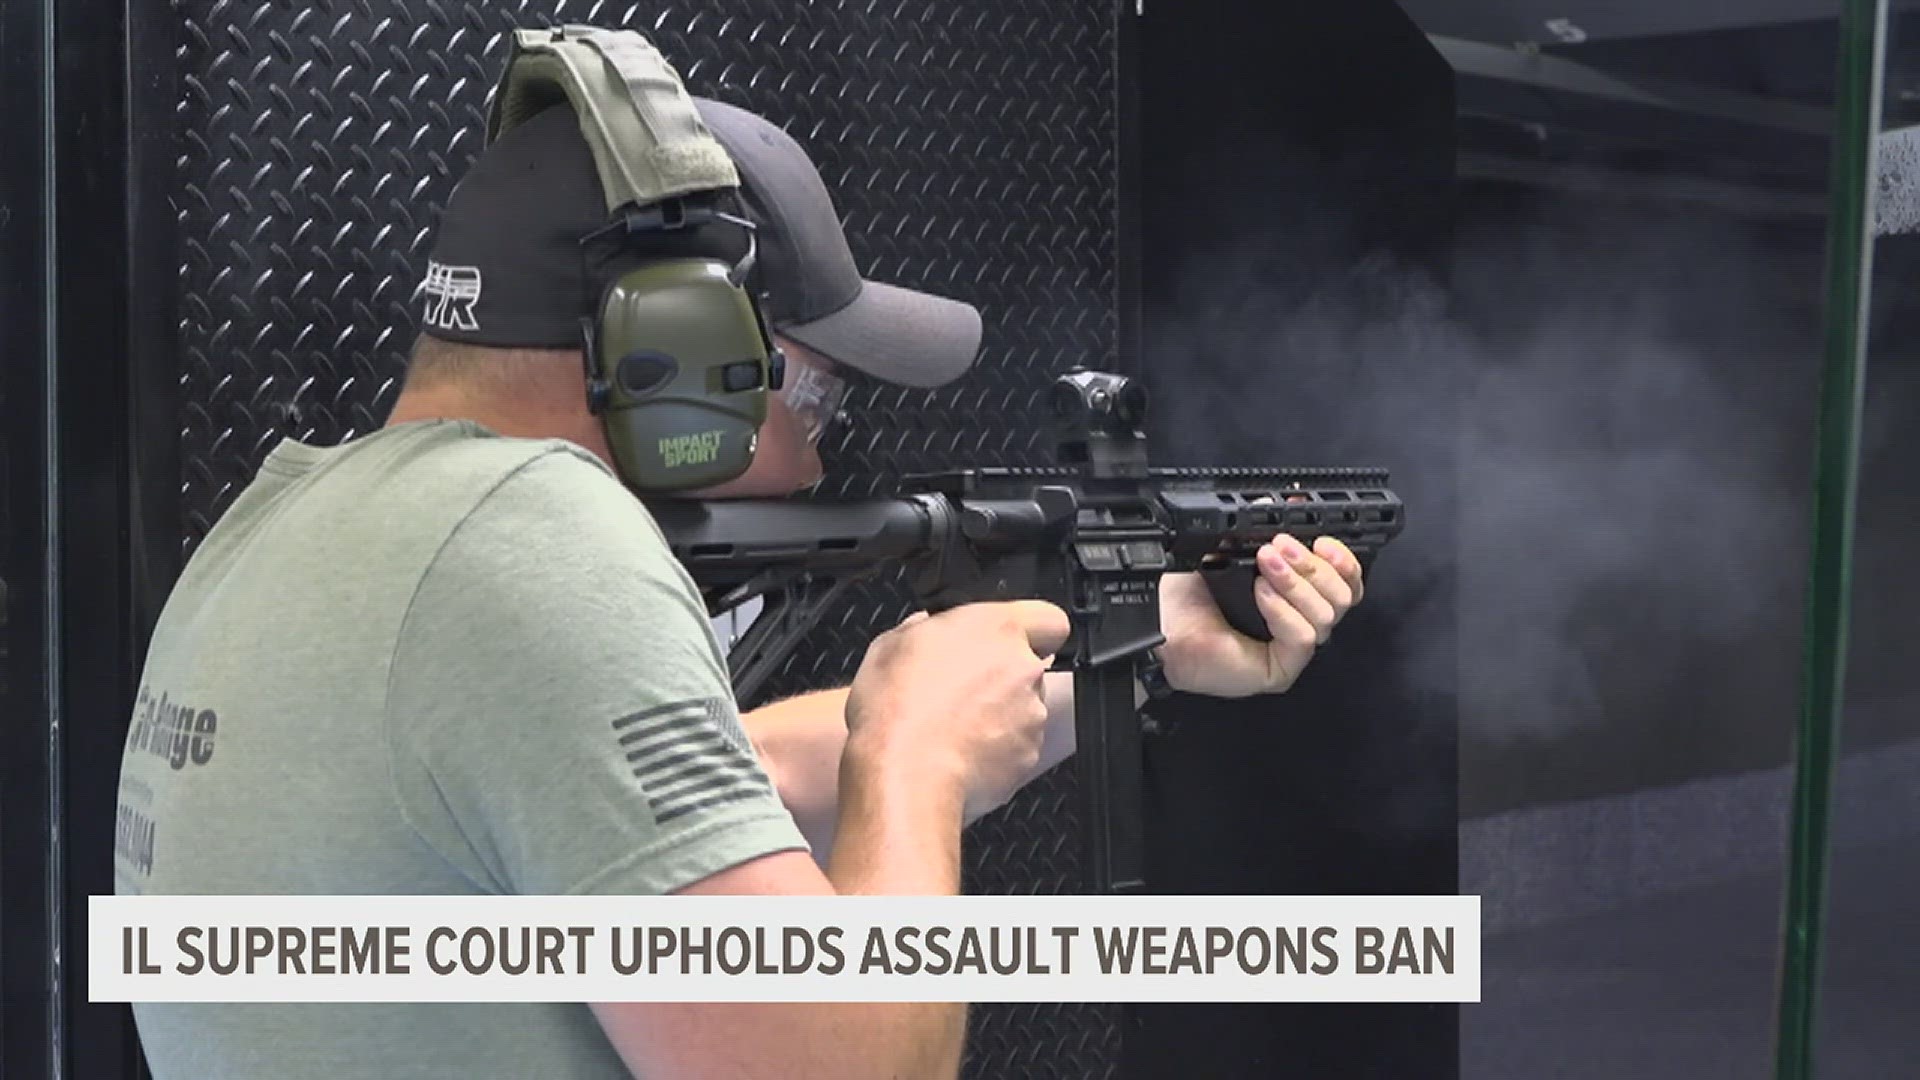 In March, a Judge in Macon County found the assault weapons ban law violated the equal protection and special legislation clauses of the Illinois constitution.